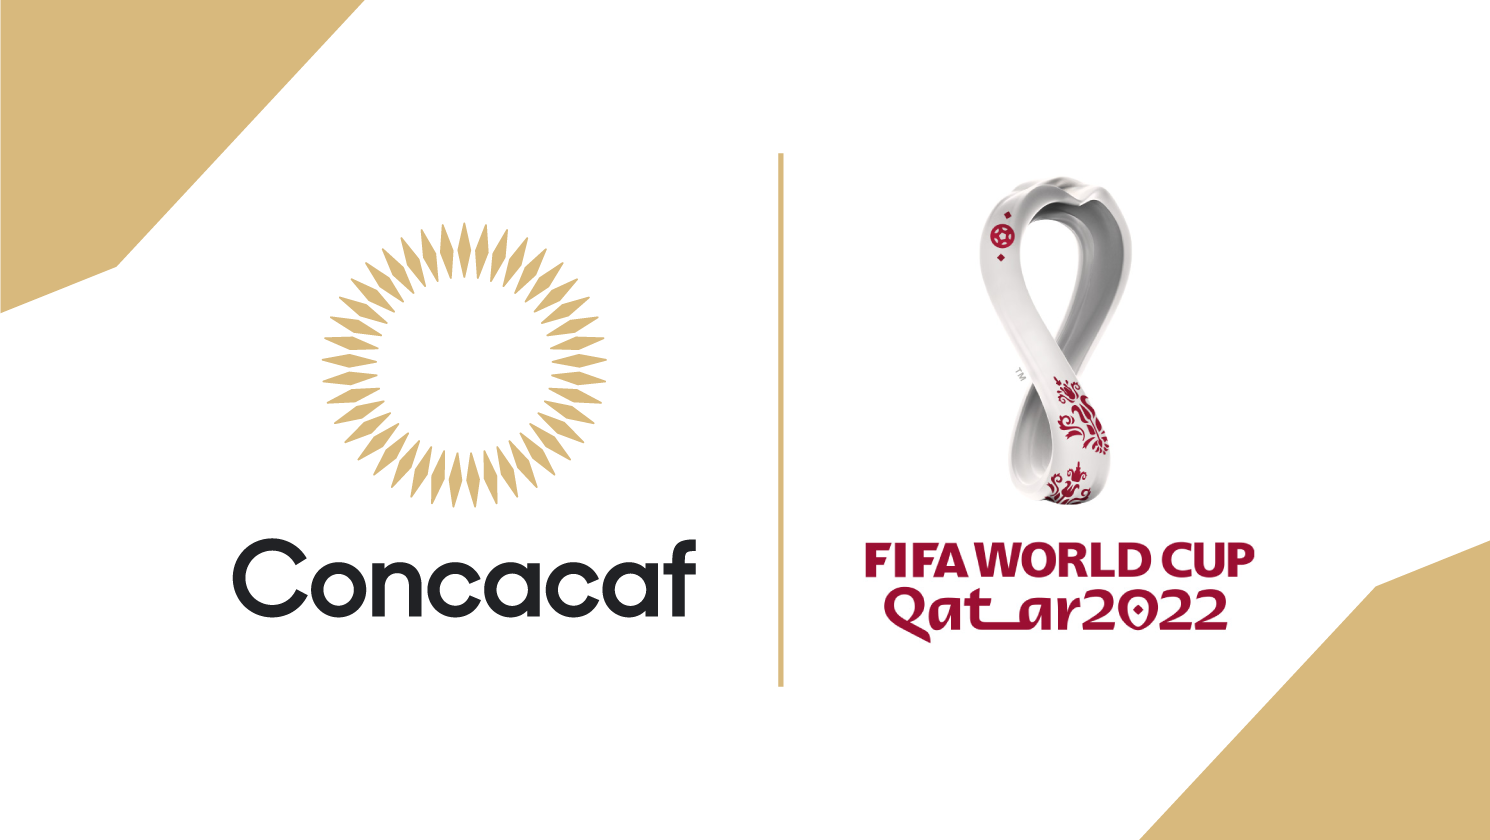 New Concacaf Qualifiers announced for regional qualification to